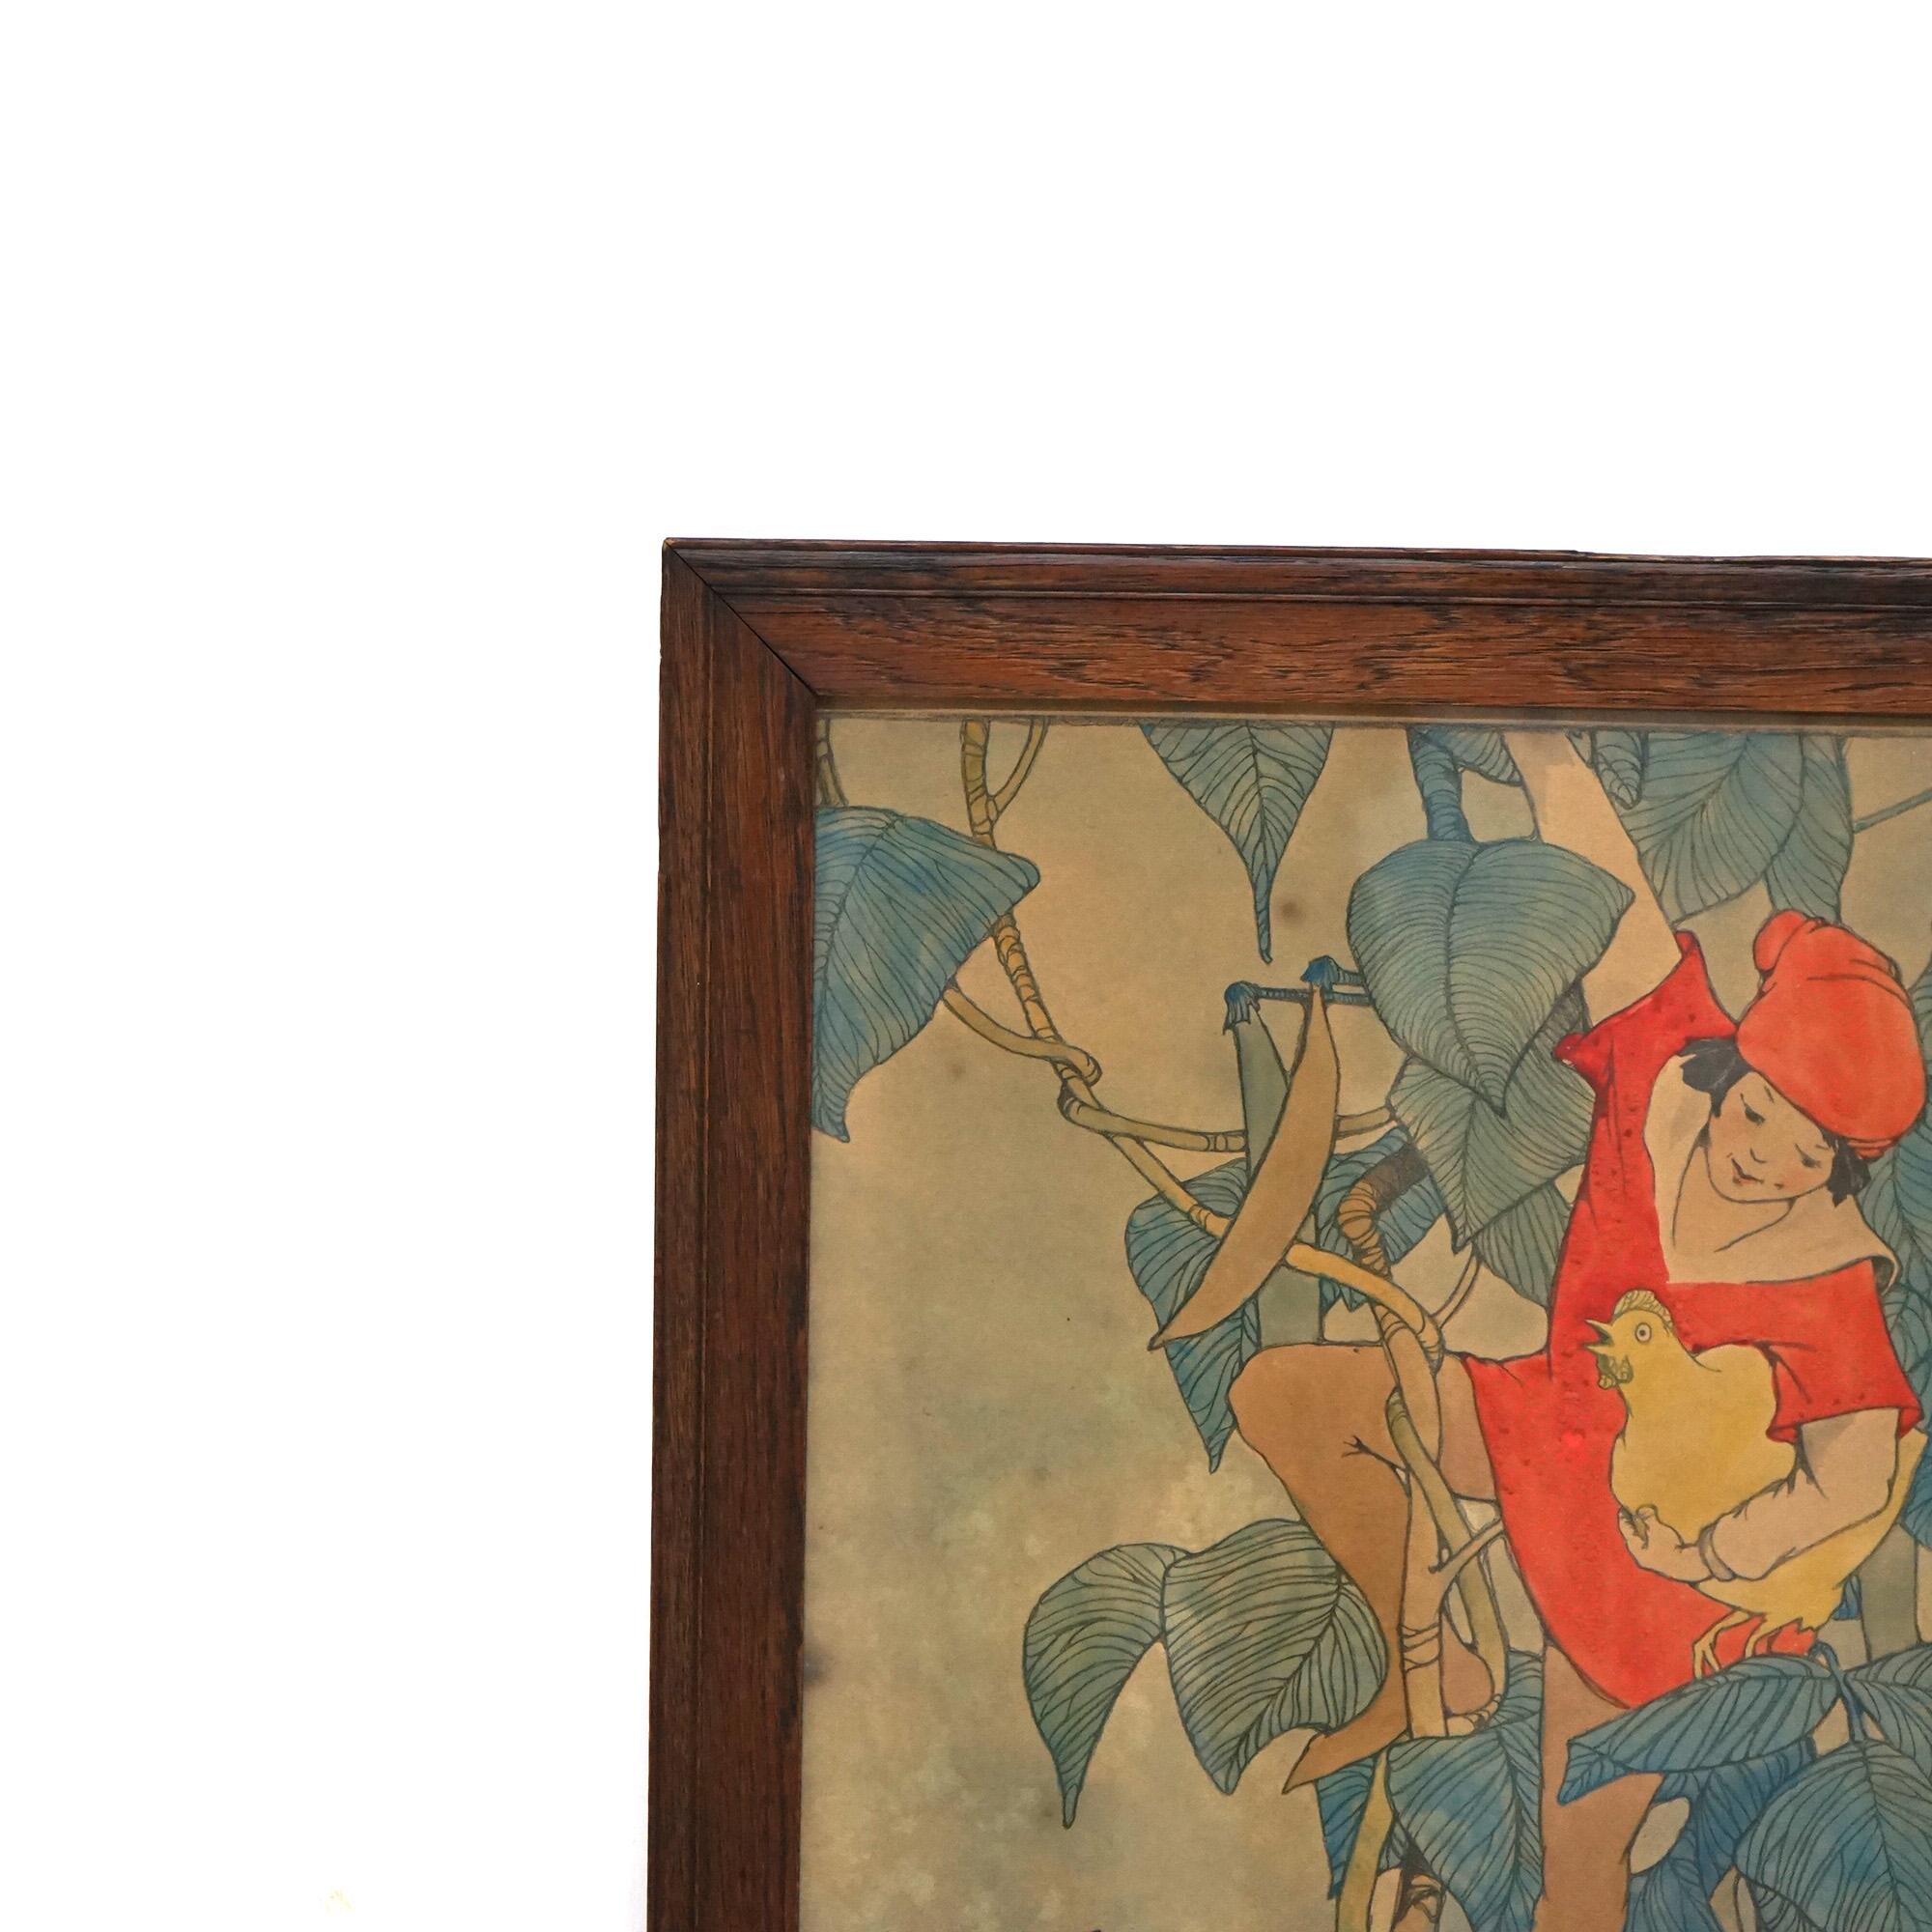 20th Century Antique Elizabeth Tyler Lithograph “Jack And The Beanstalk”, Framed, C1920 For Sale